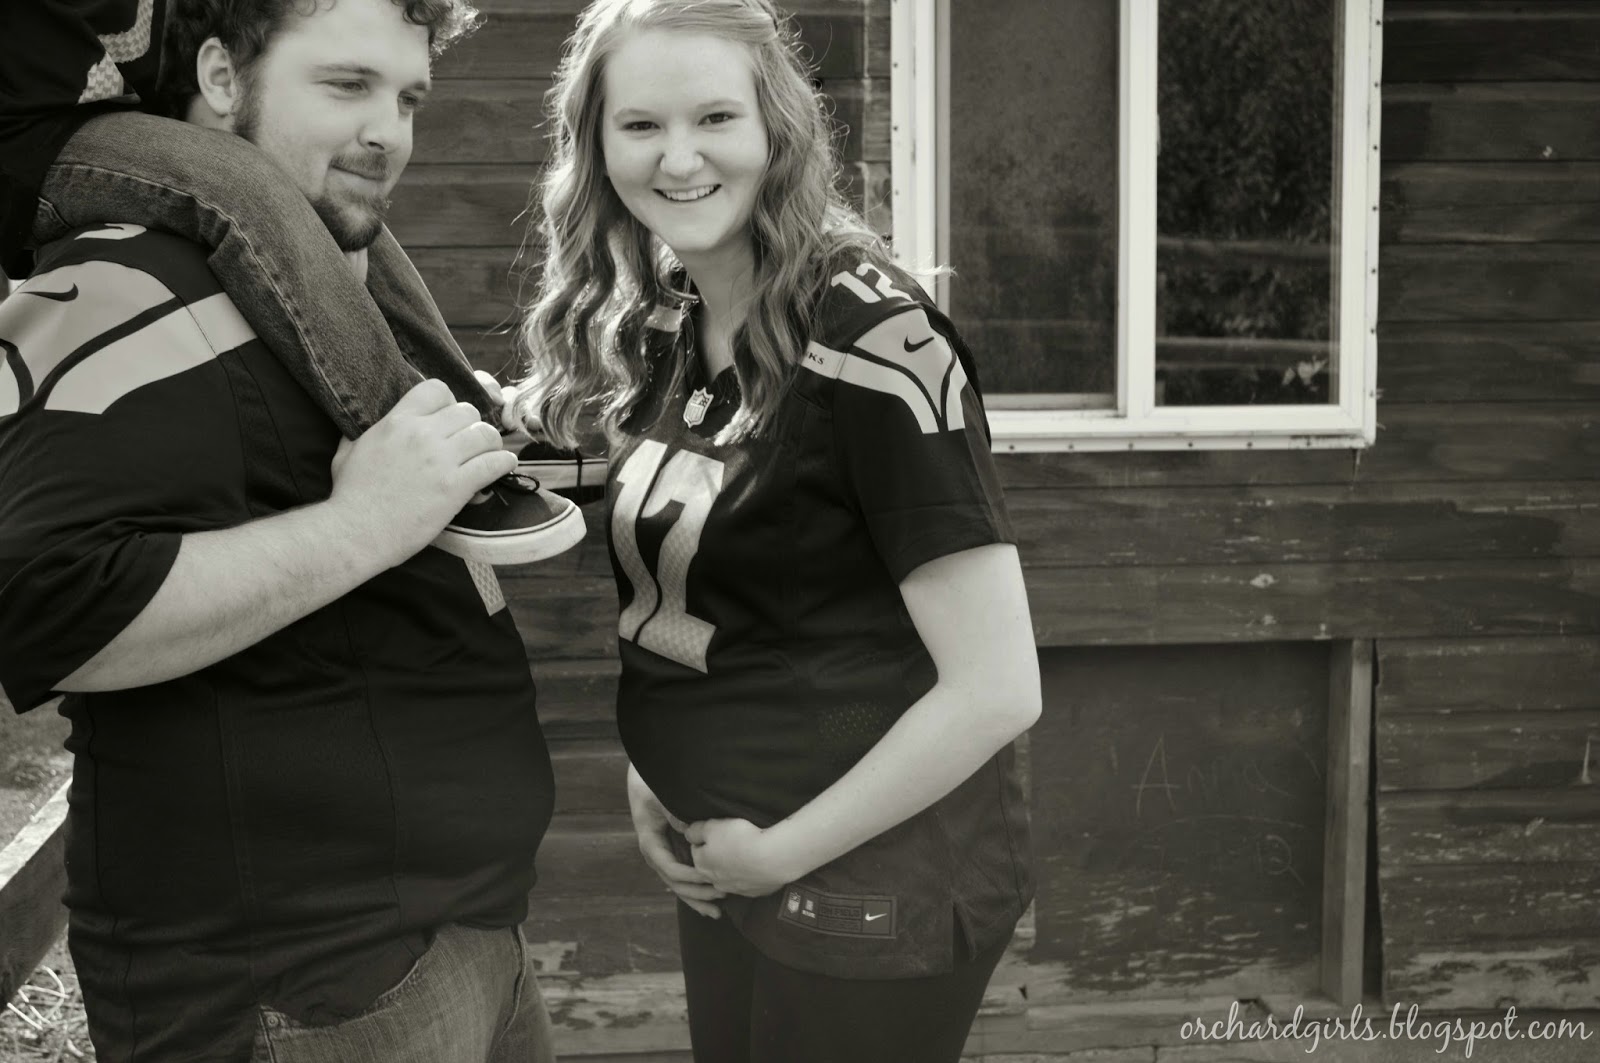 Pregnancy Photoshoot + Gender Reveal Announcement on Orchard Girls Blog